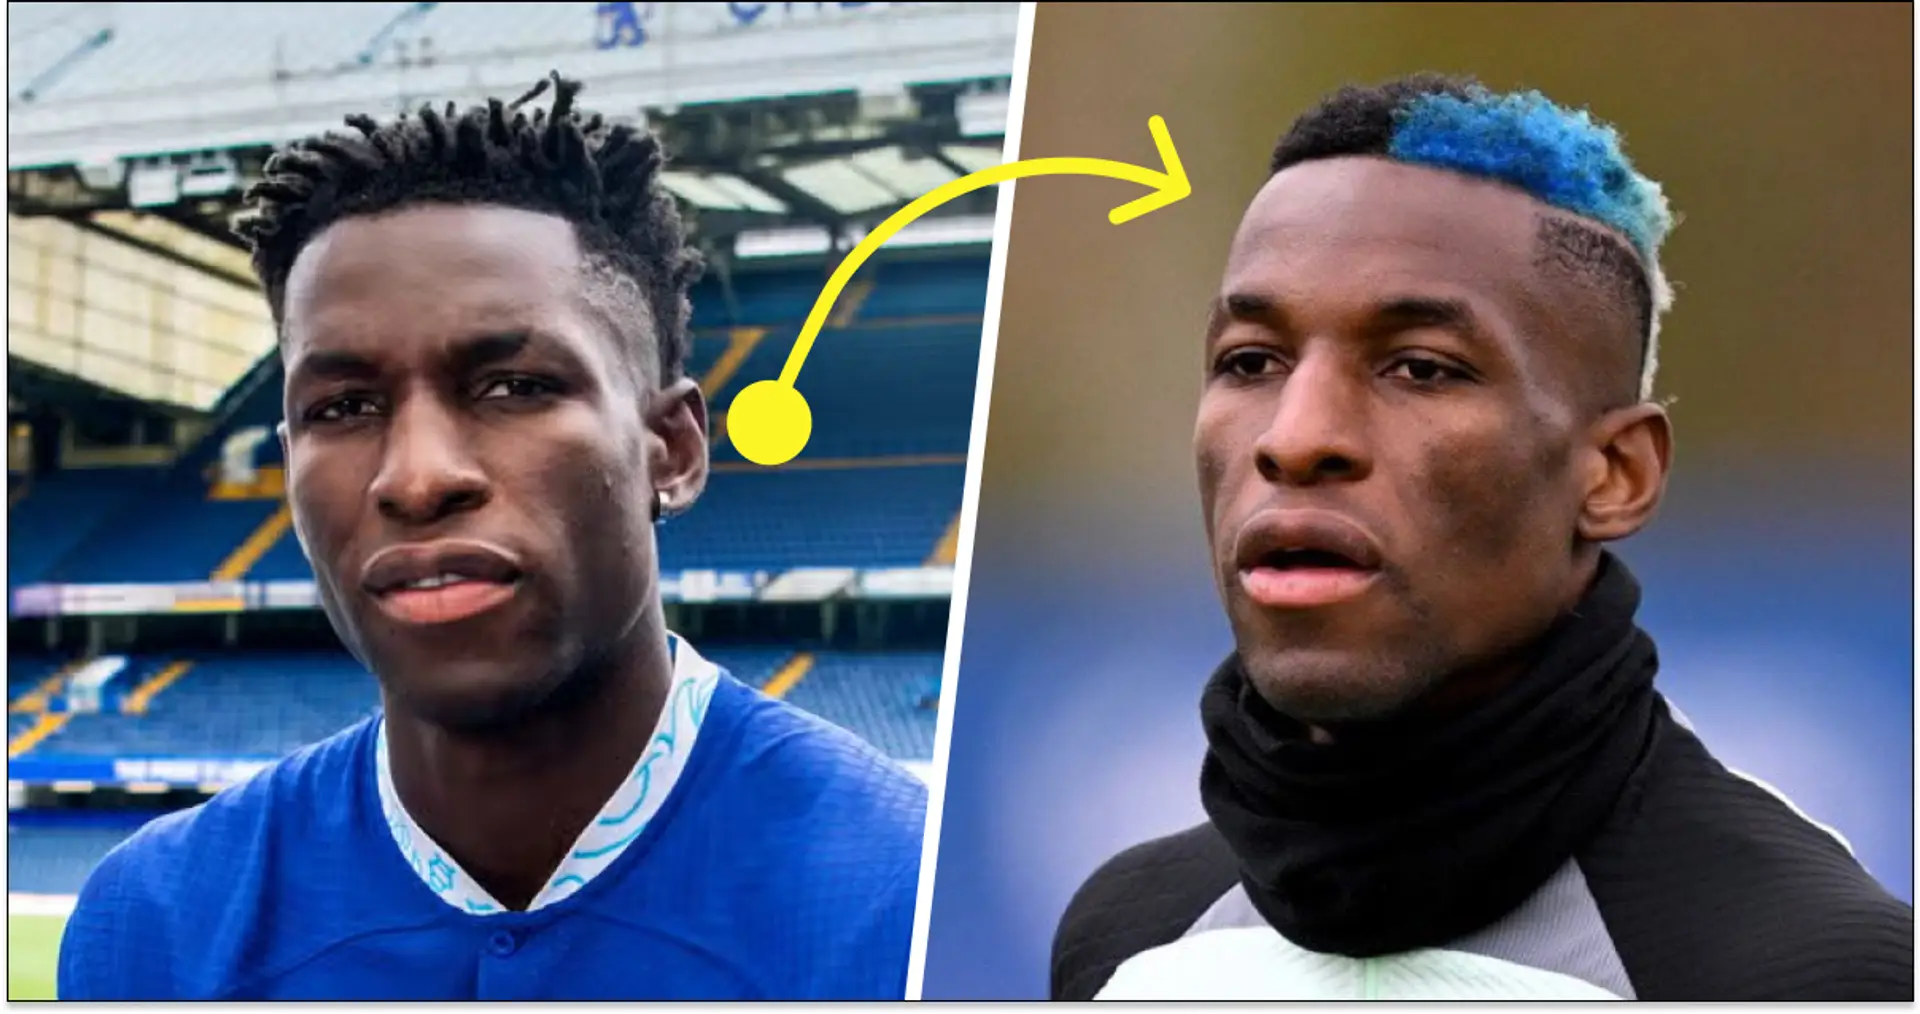 'Man United ain't ready': Chelsea fans react as Jackson changes hairstyle